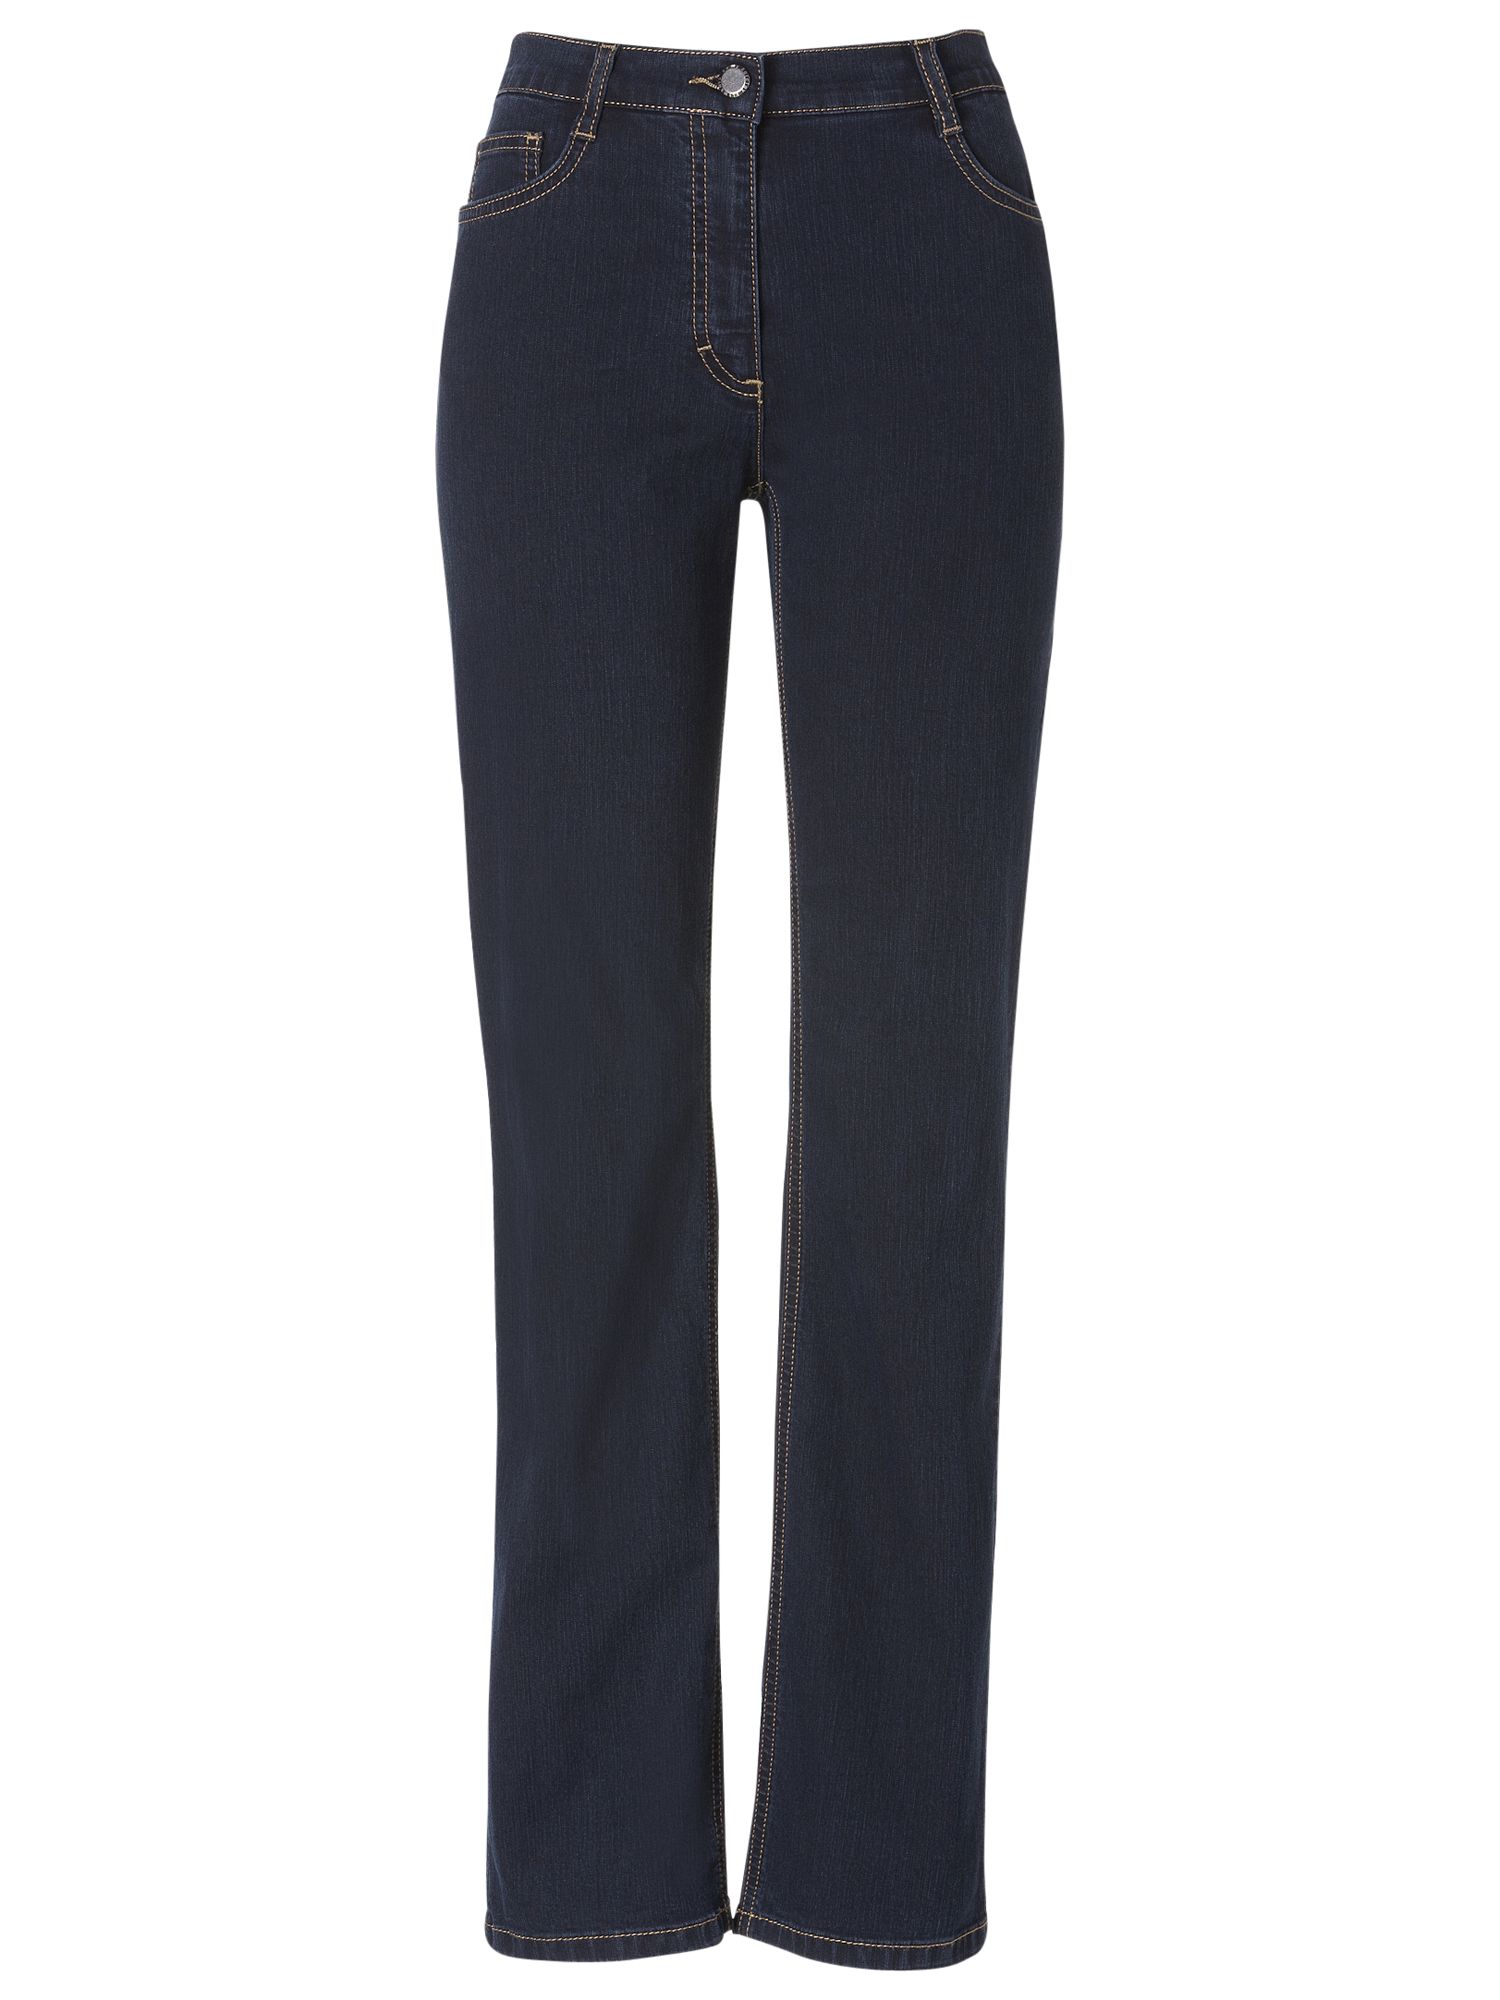 betty barclay jeans